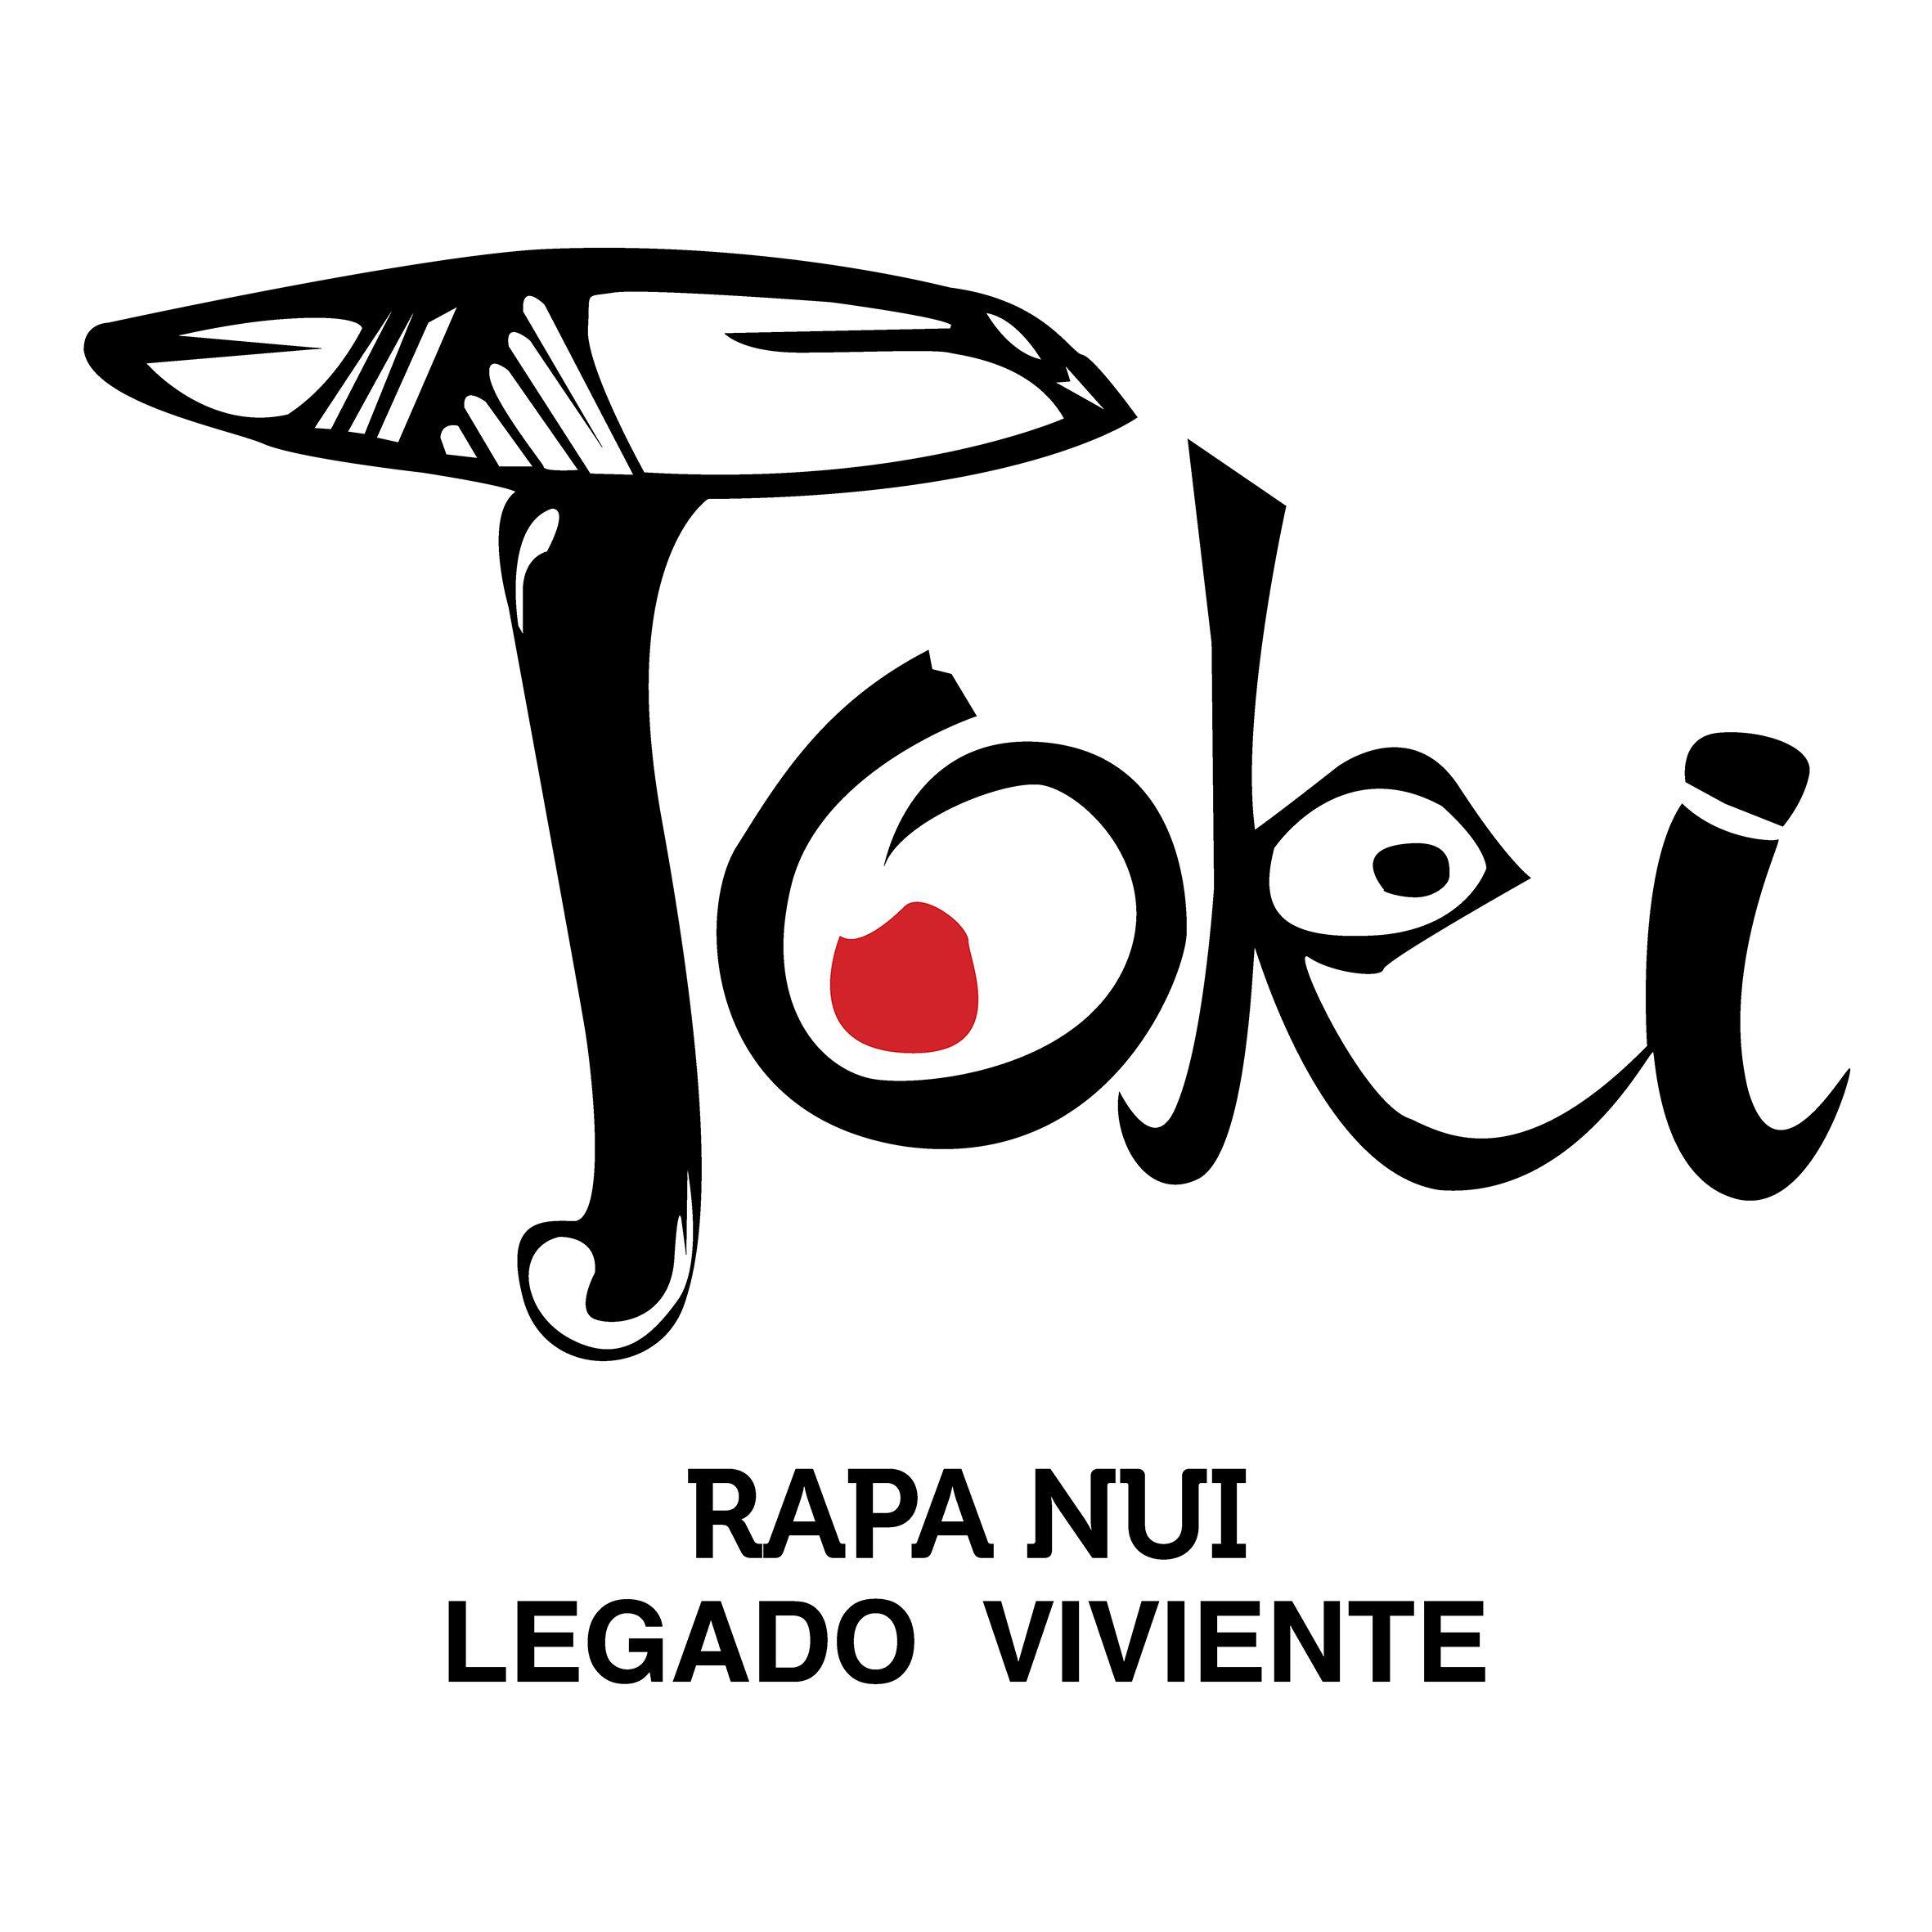 Toki Logo - Tailor-made holidays and travel experiences in Chile and South America